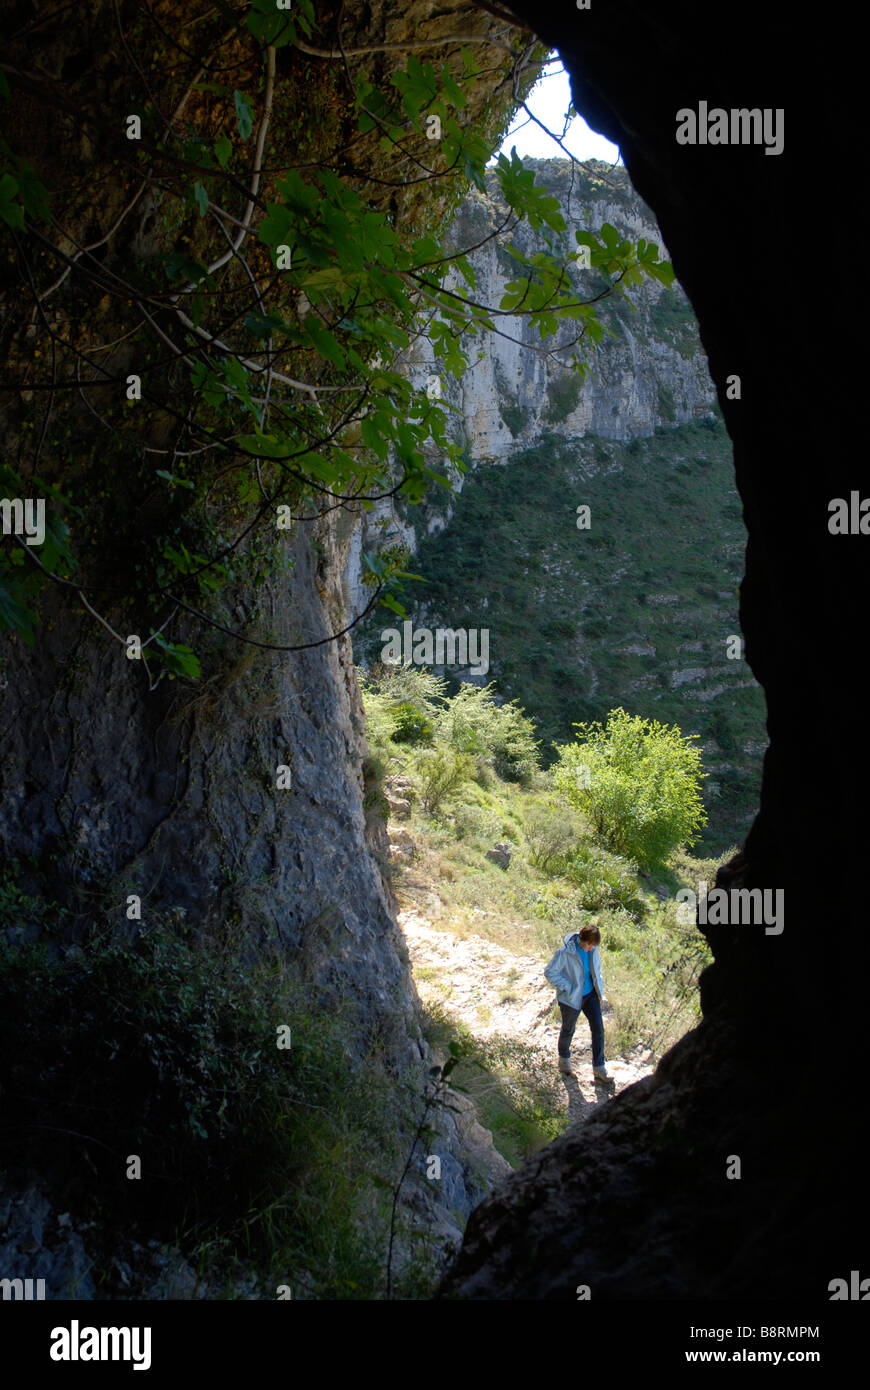 looking out of a cave to a woman walking past, Vall de Laguart, Benimaurell, Alicante Province, Comunidad Valenciana, Spain Stock Photo